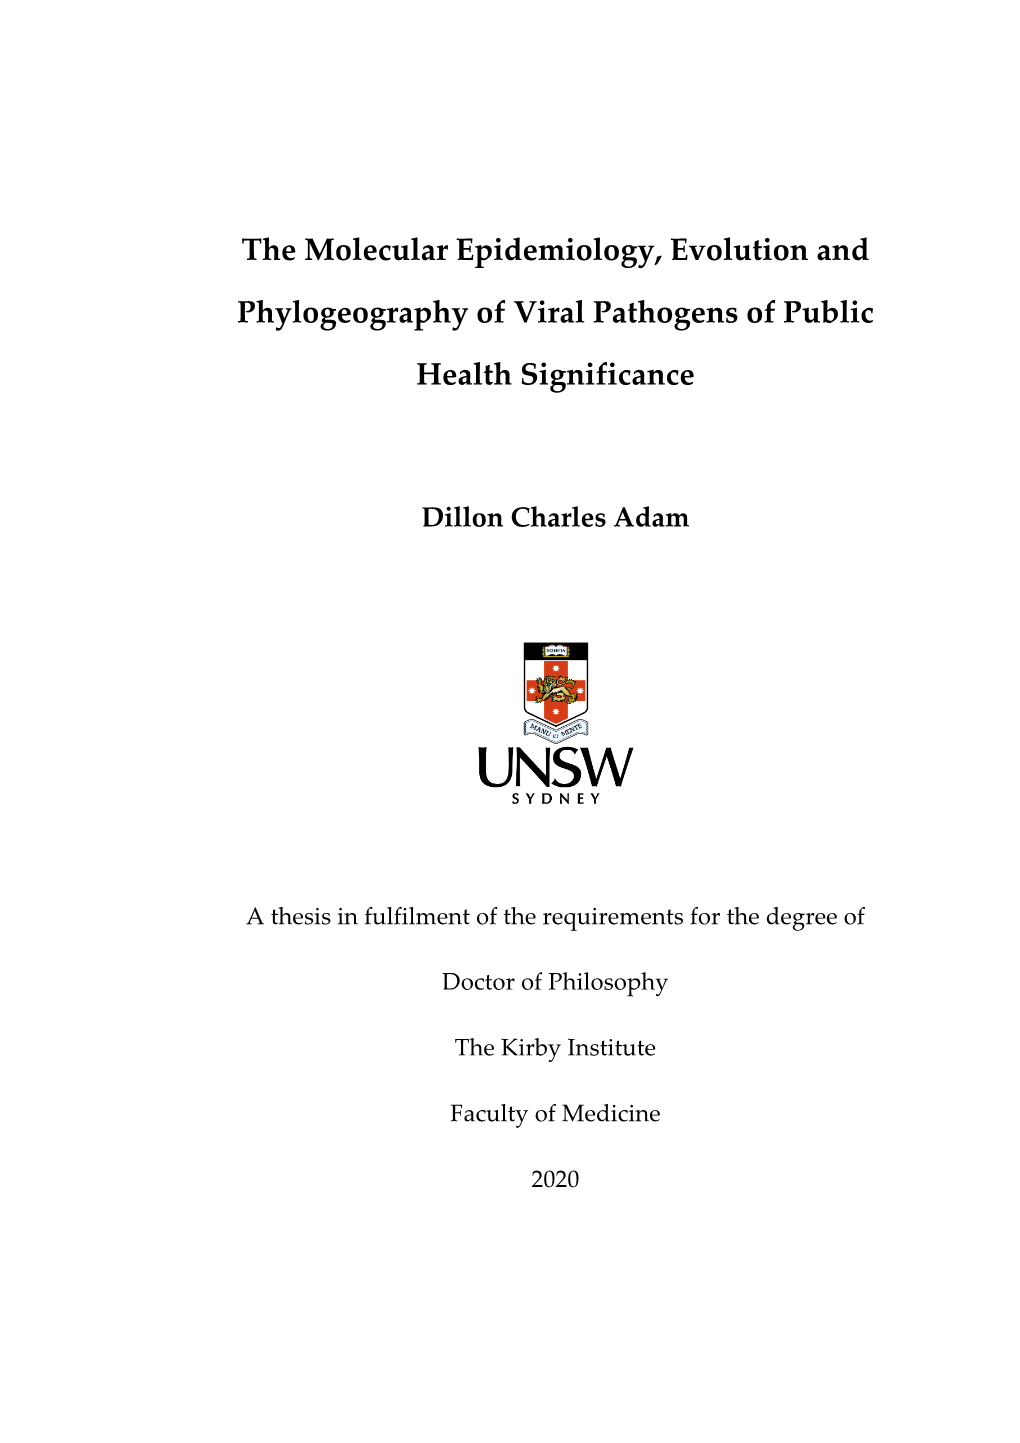 The Molecular Epidemiology, Evolution and Phylogeography of Various Pathogens of Public Health Significance